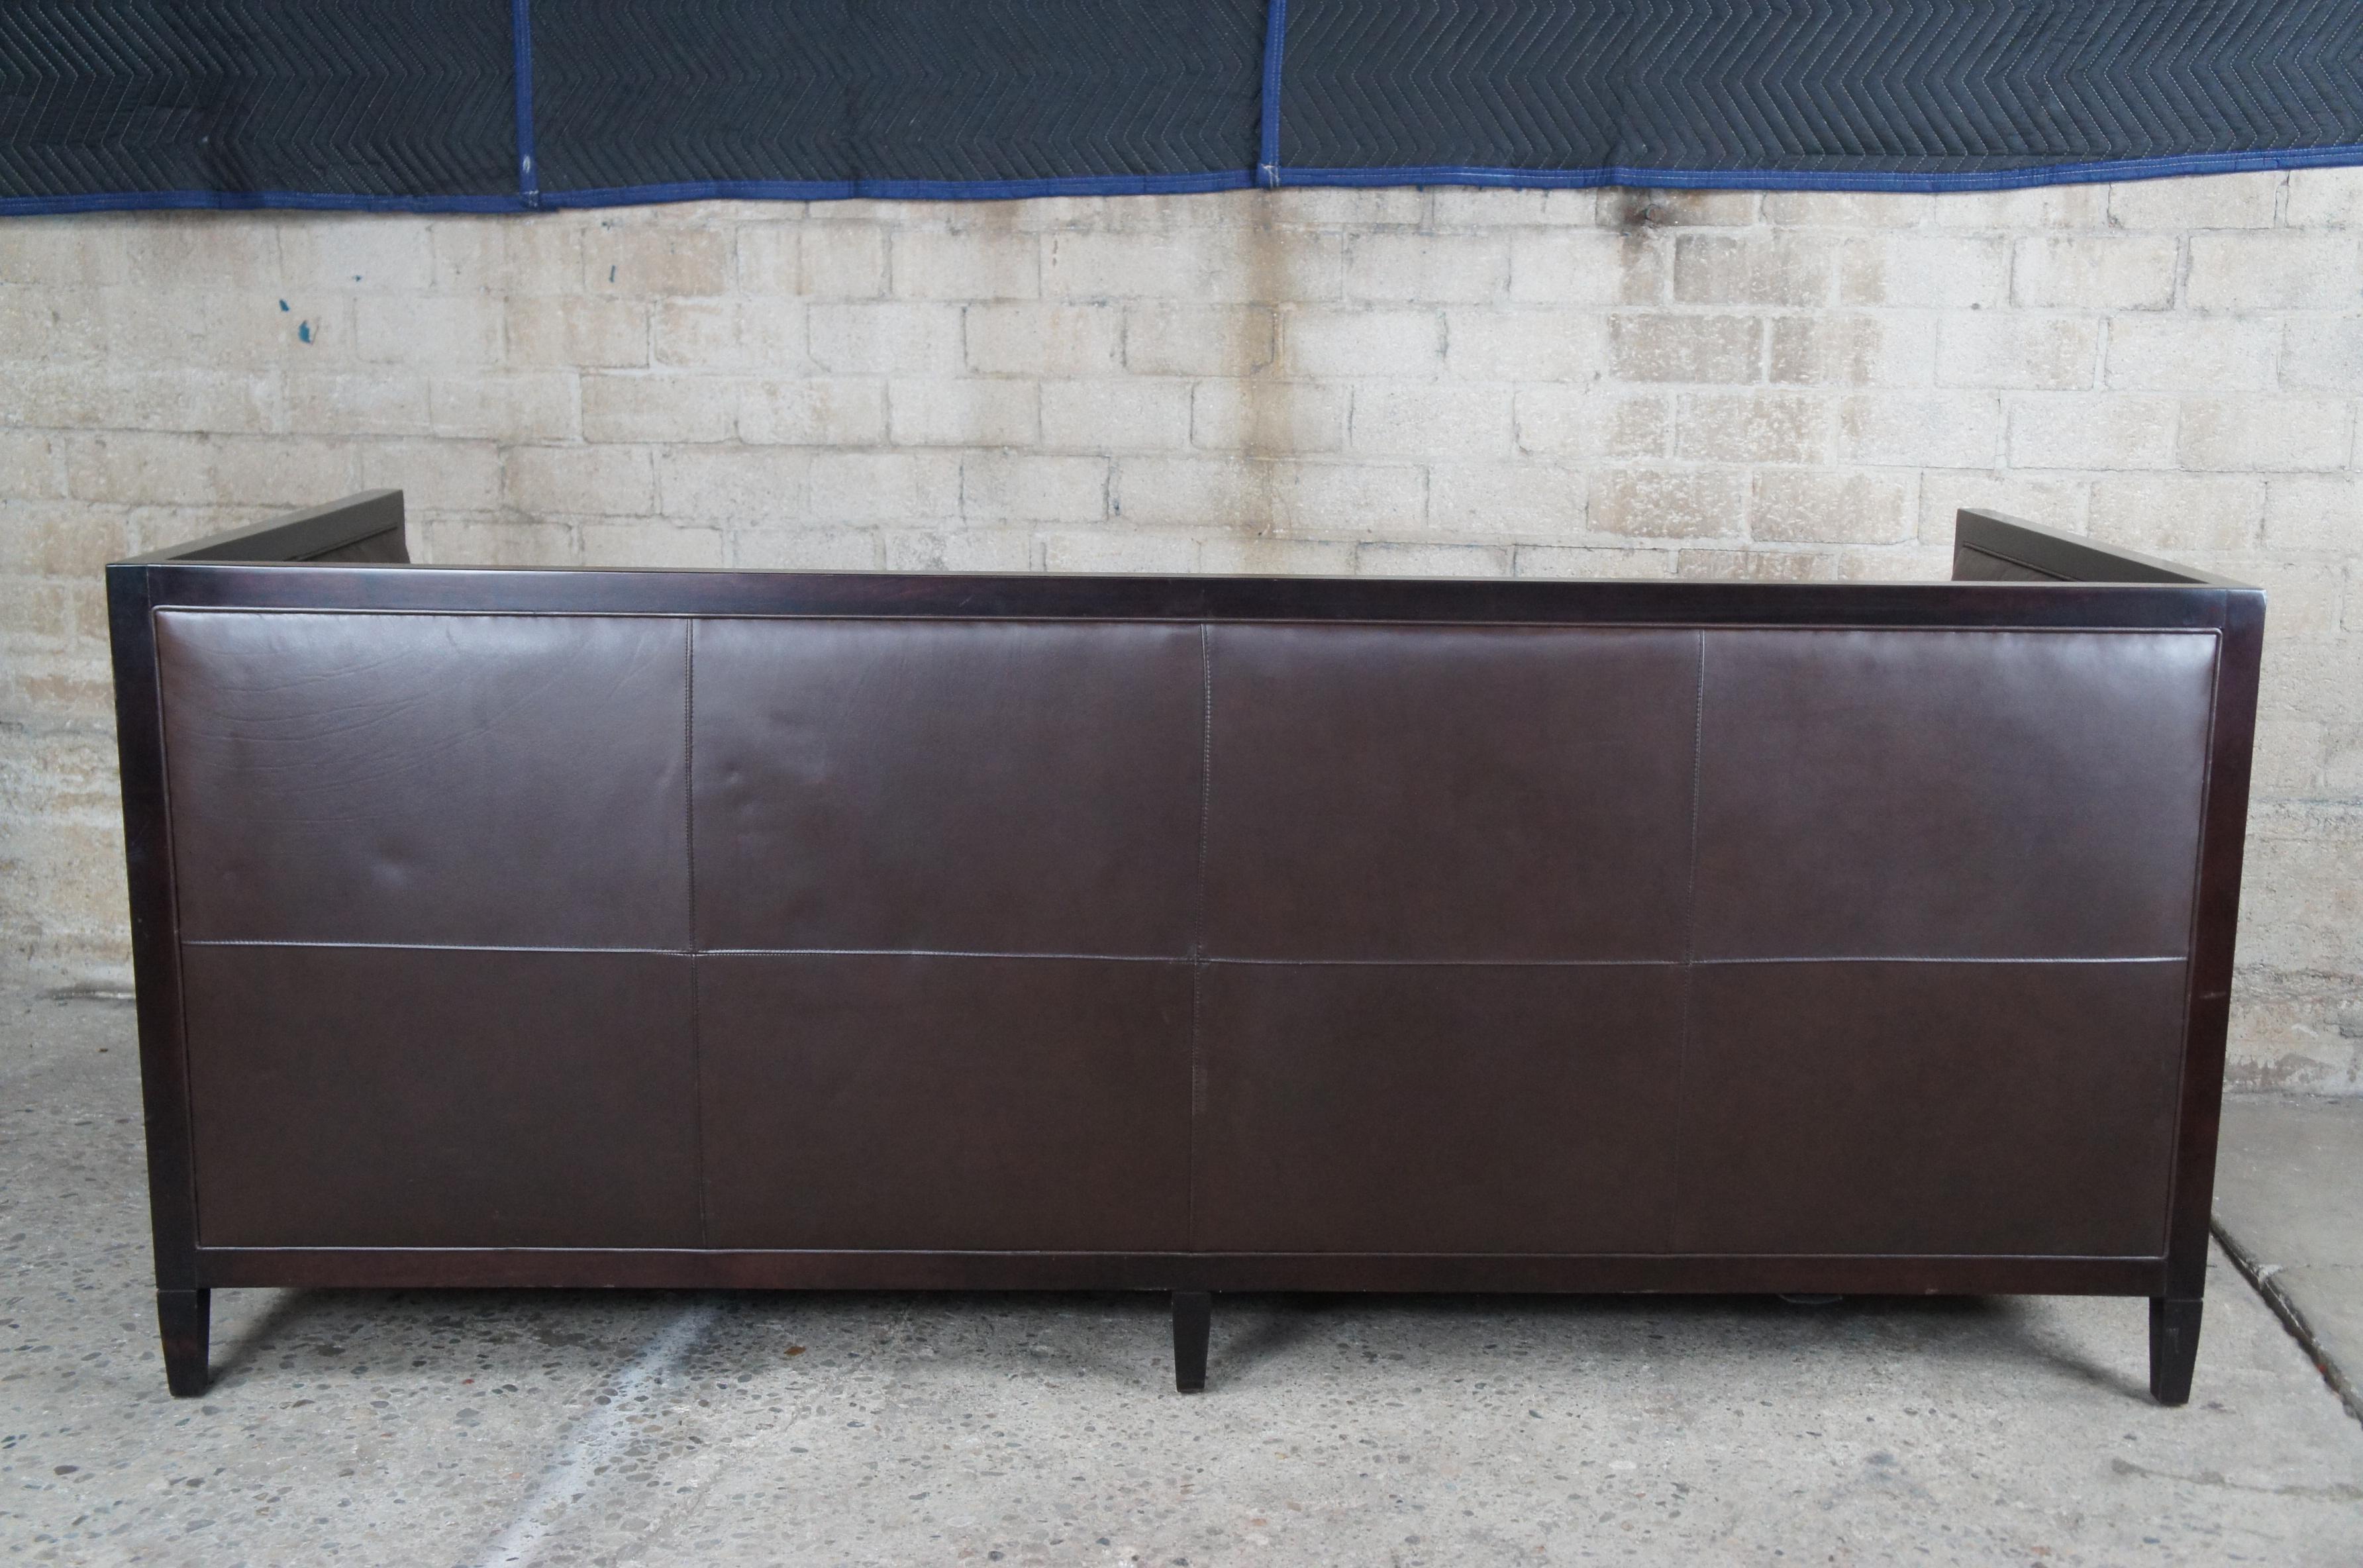 Baker Furniture Archetype Maple Wood Banded Brown Leather Modern Sofa 6370-78 4